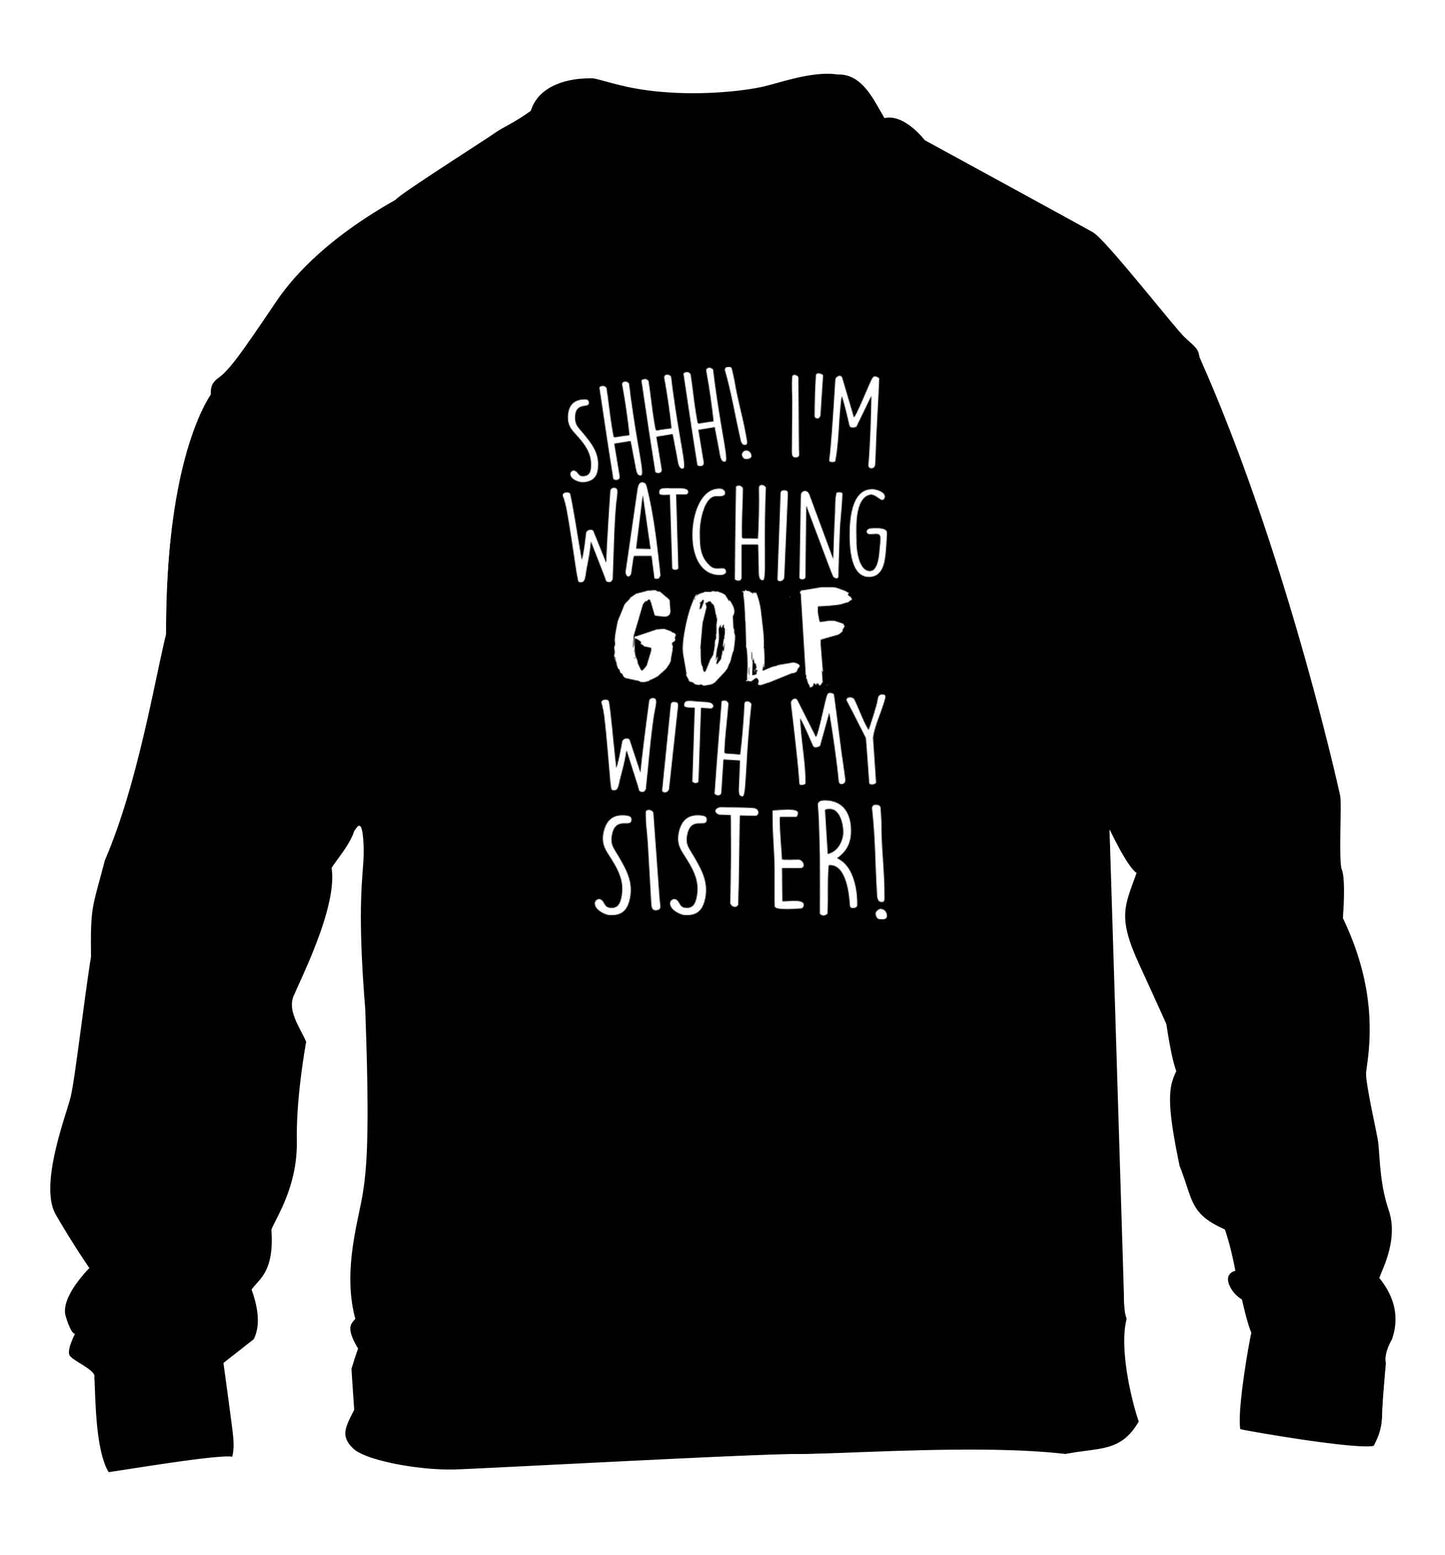 Shh I'm watching golf with my sister children's black sweater 12-13 Years